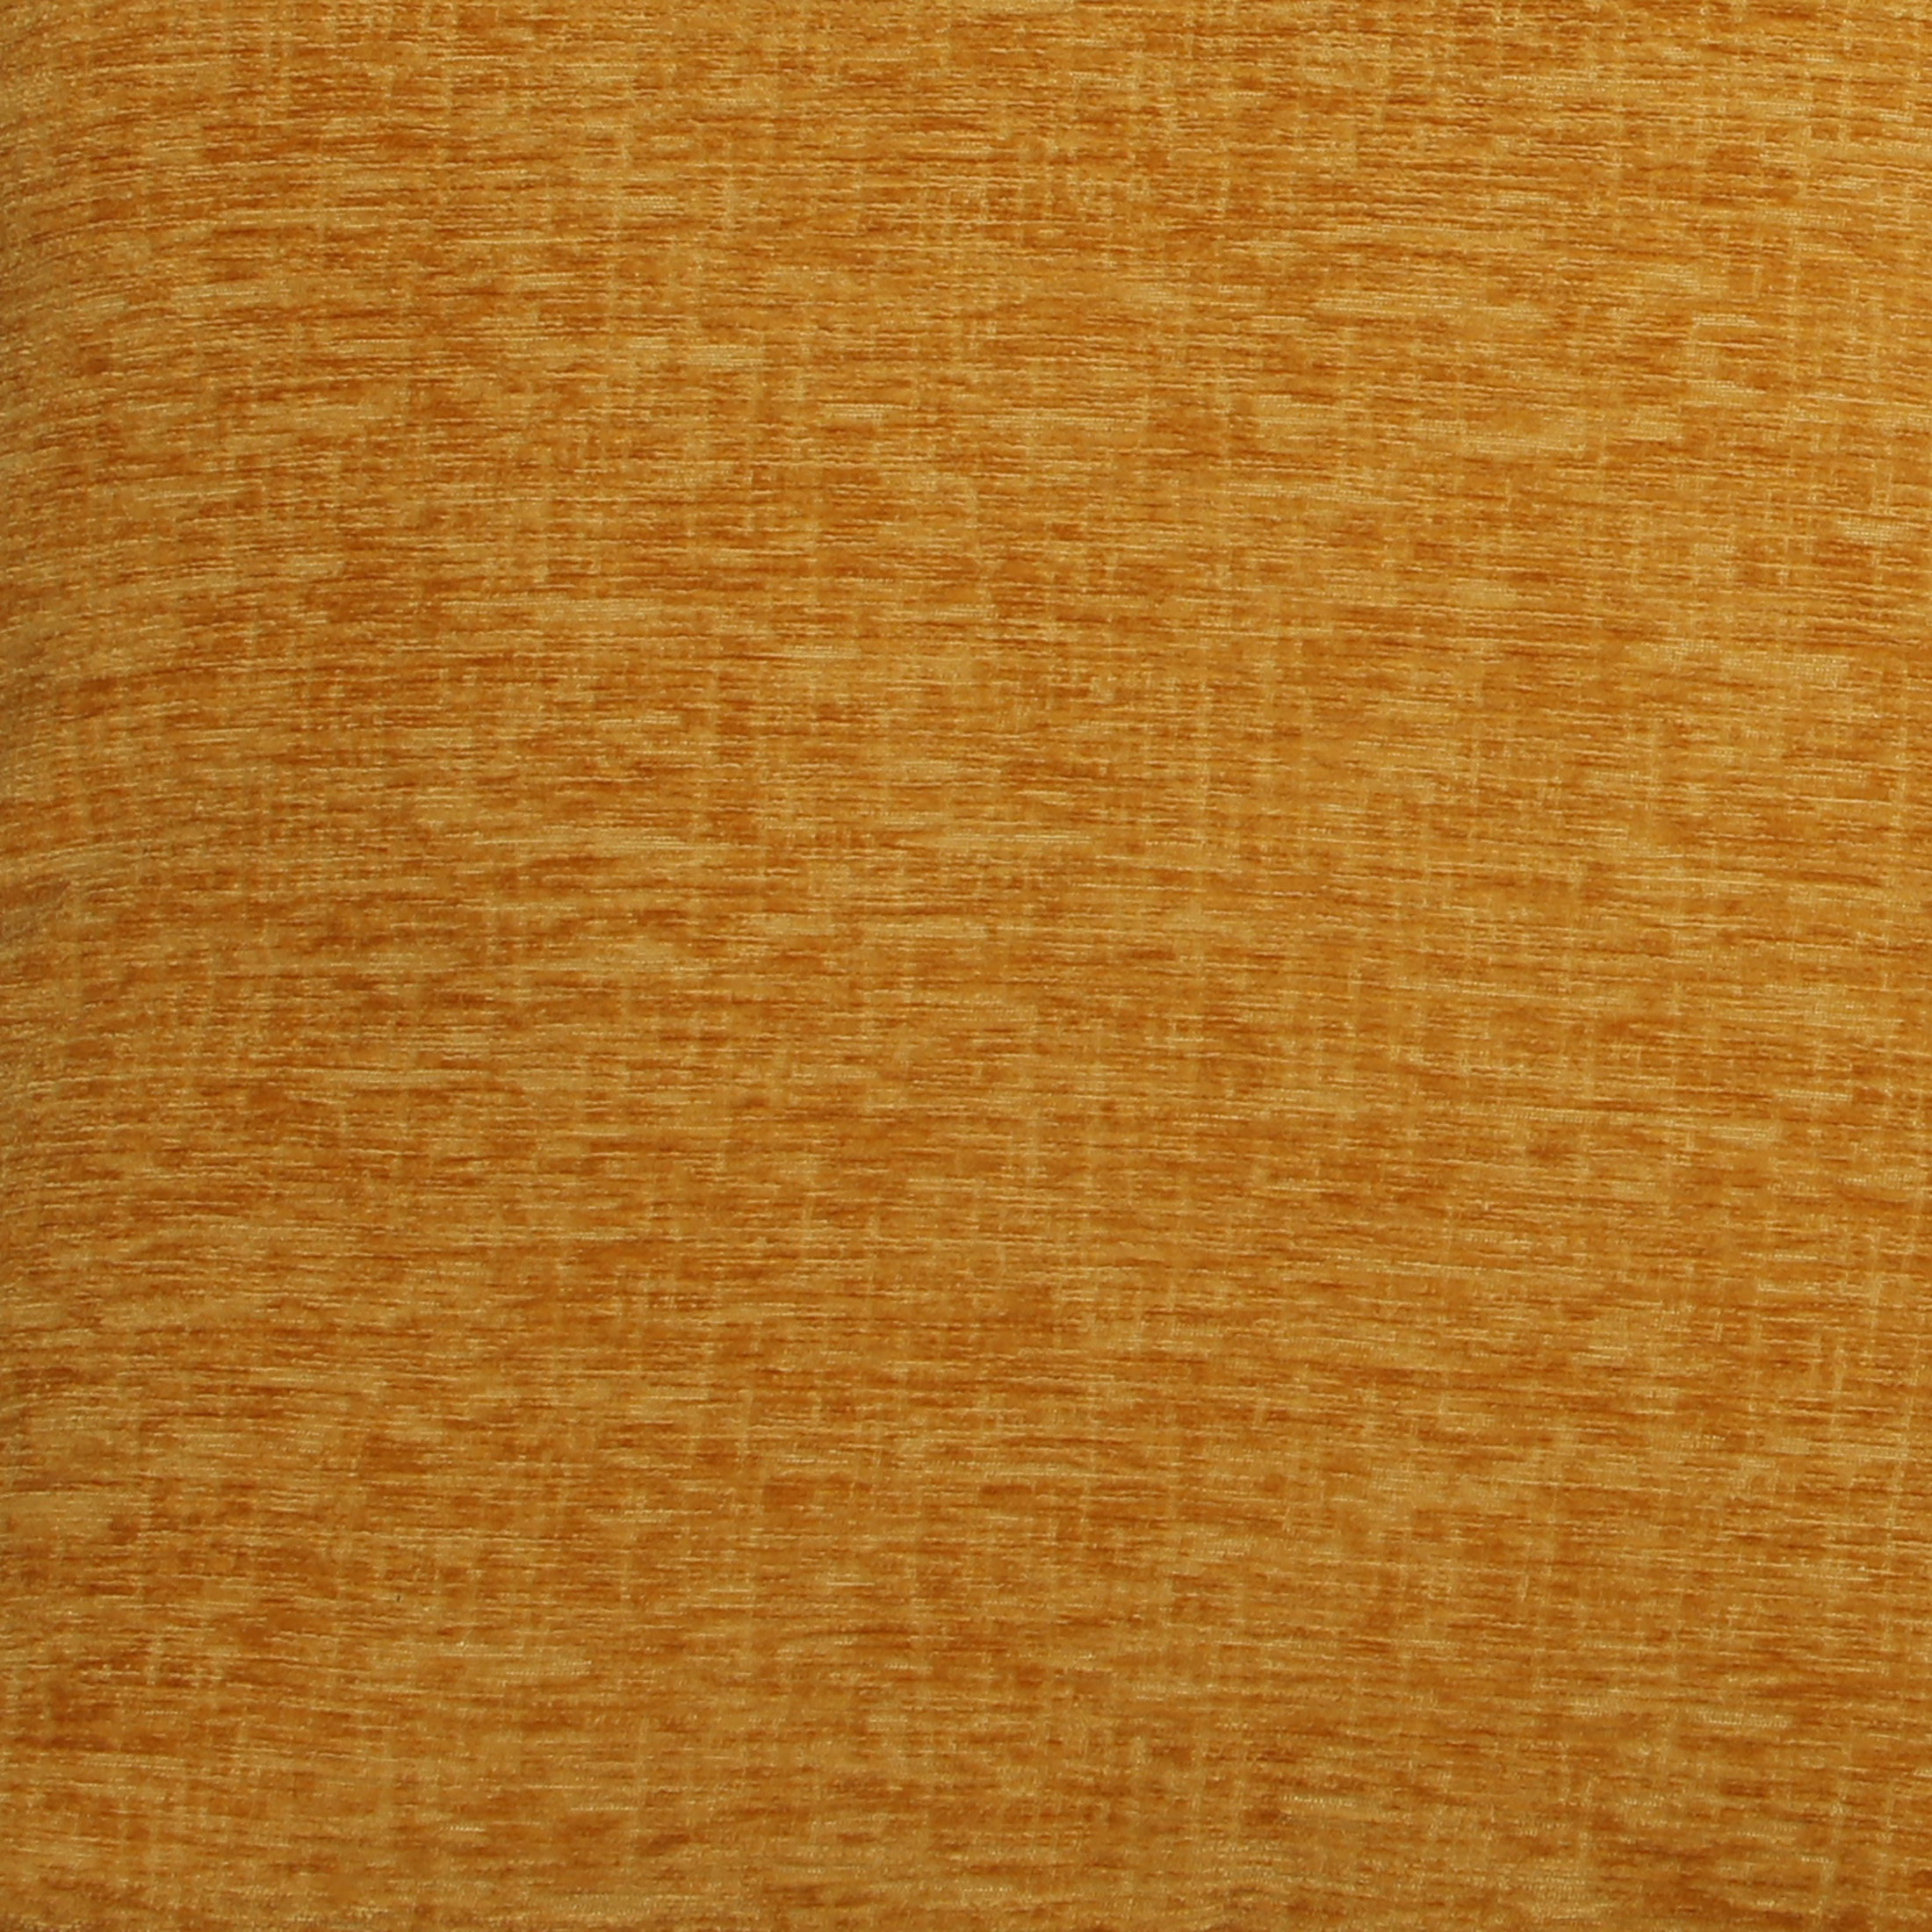 Mainstays Chenille Yellow Pillow 18''x18'', 2 Pack - image 5 of 5